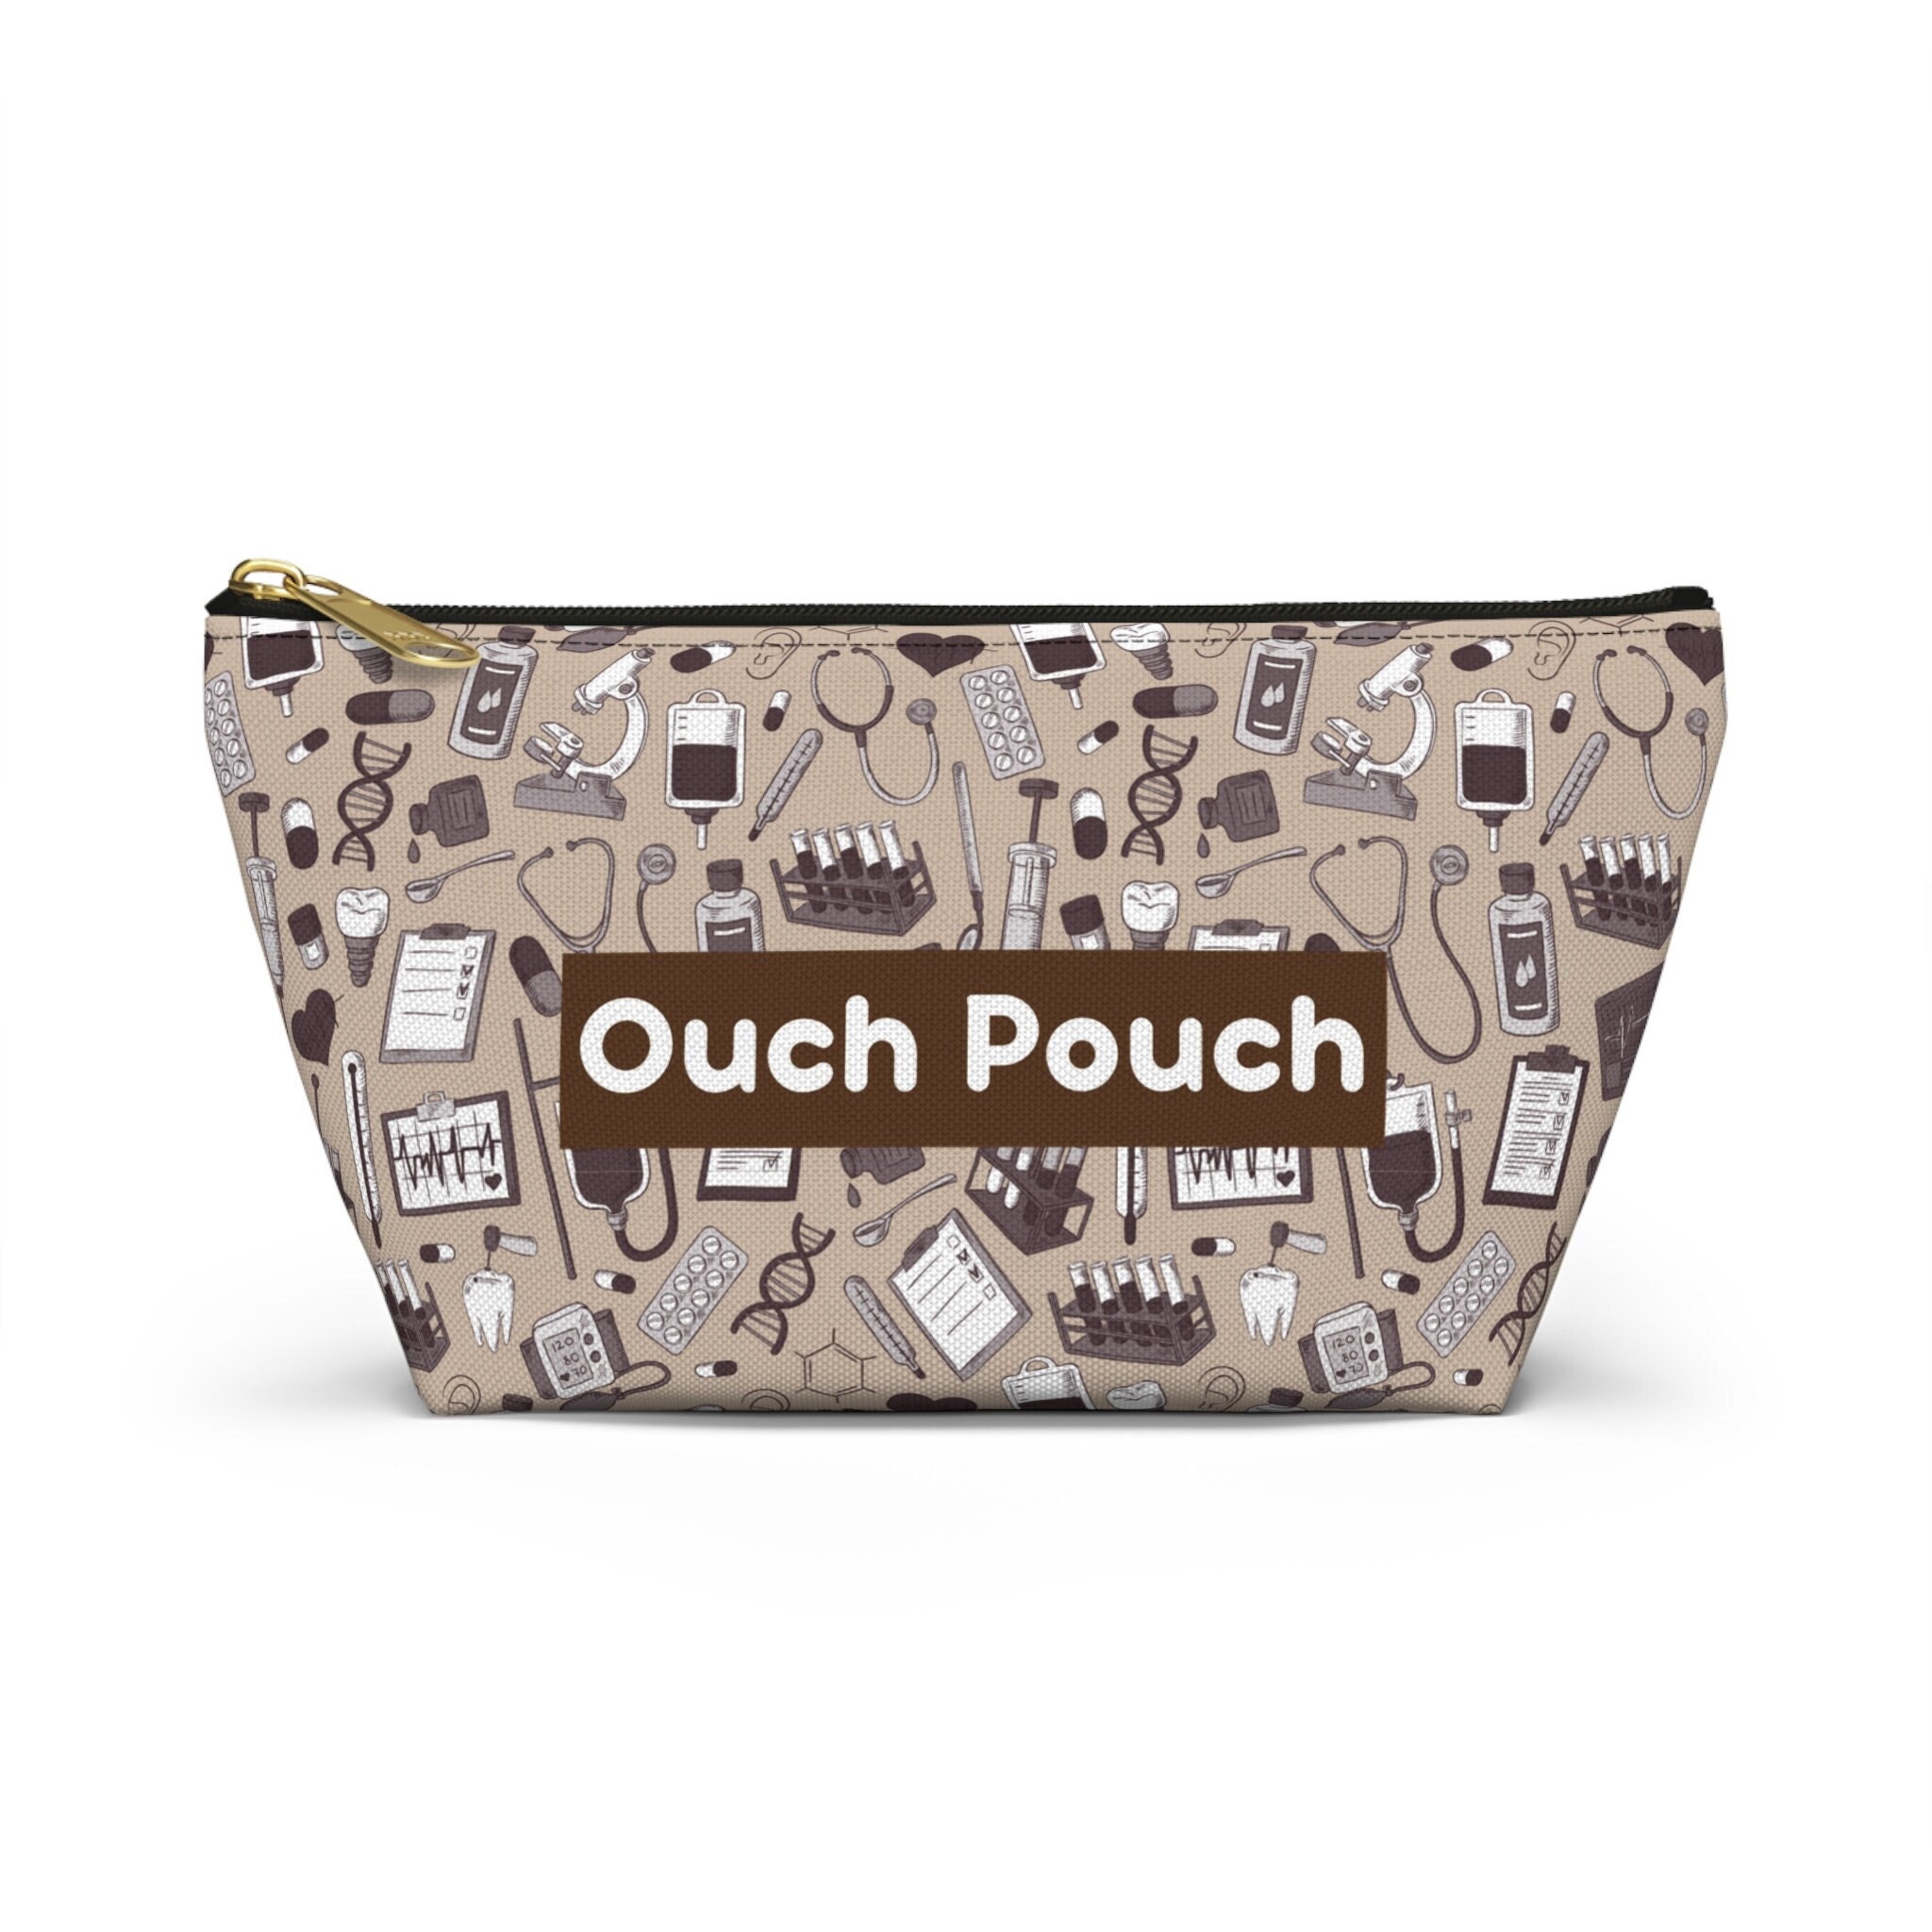 Ouch Pouch, Oh Shit Kit, First Aid Bag, Hangover Kit, Bride